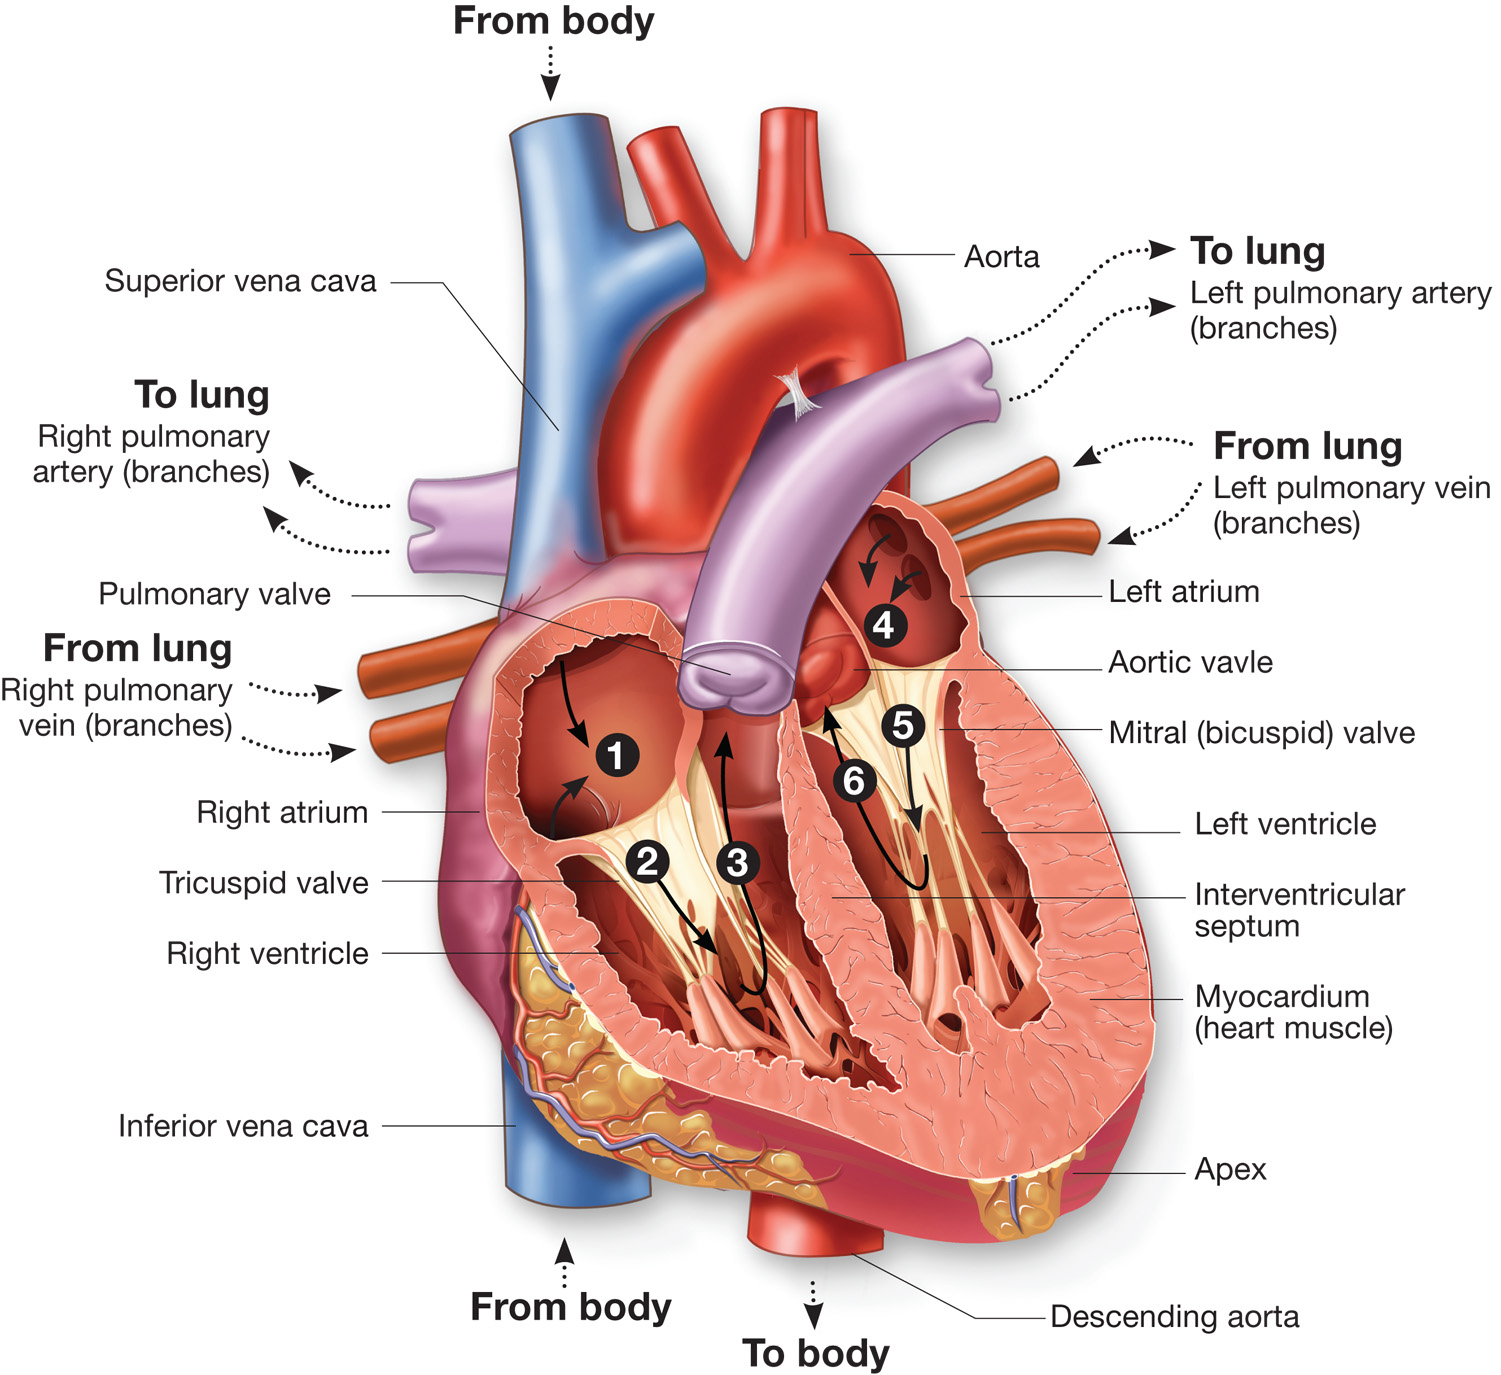 How does blood flow through the heart?